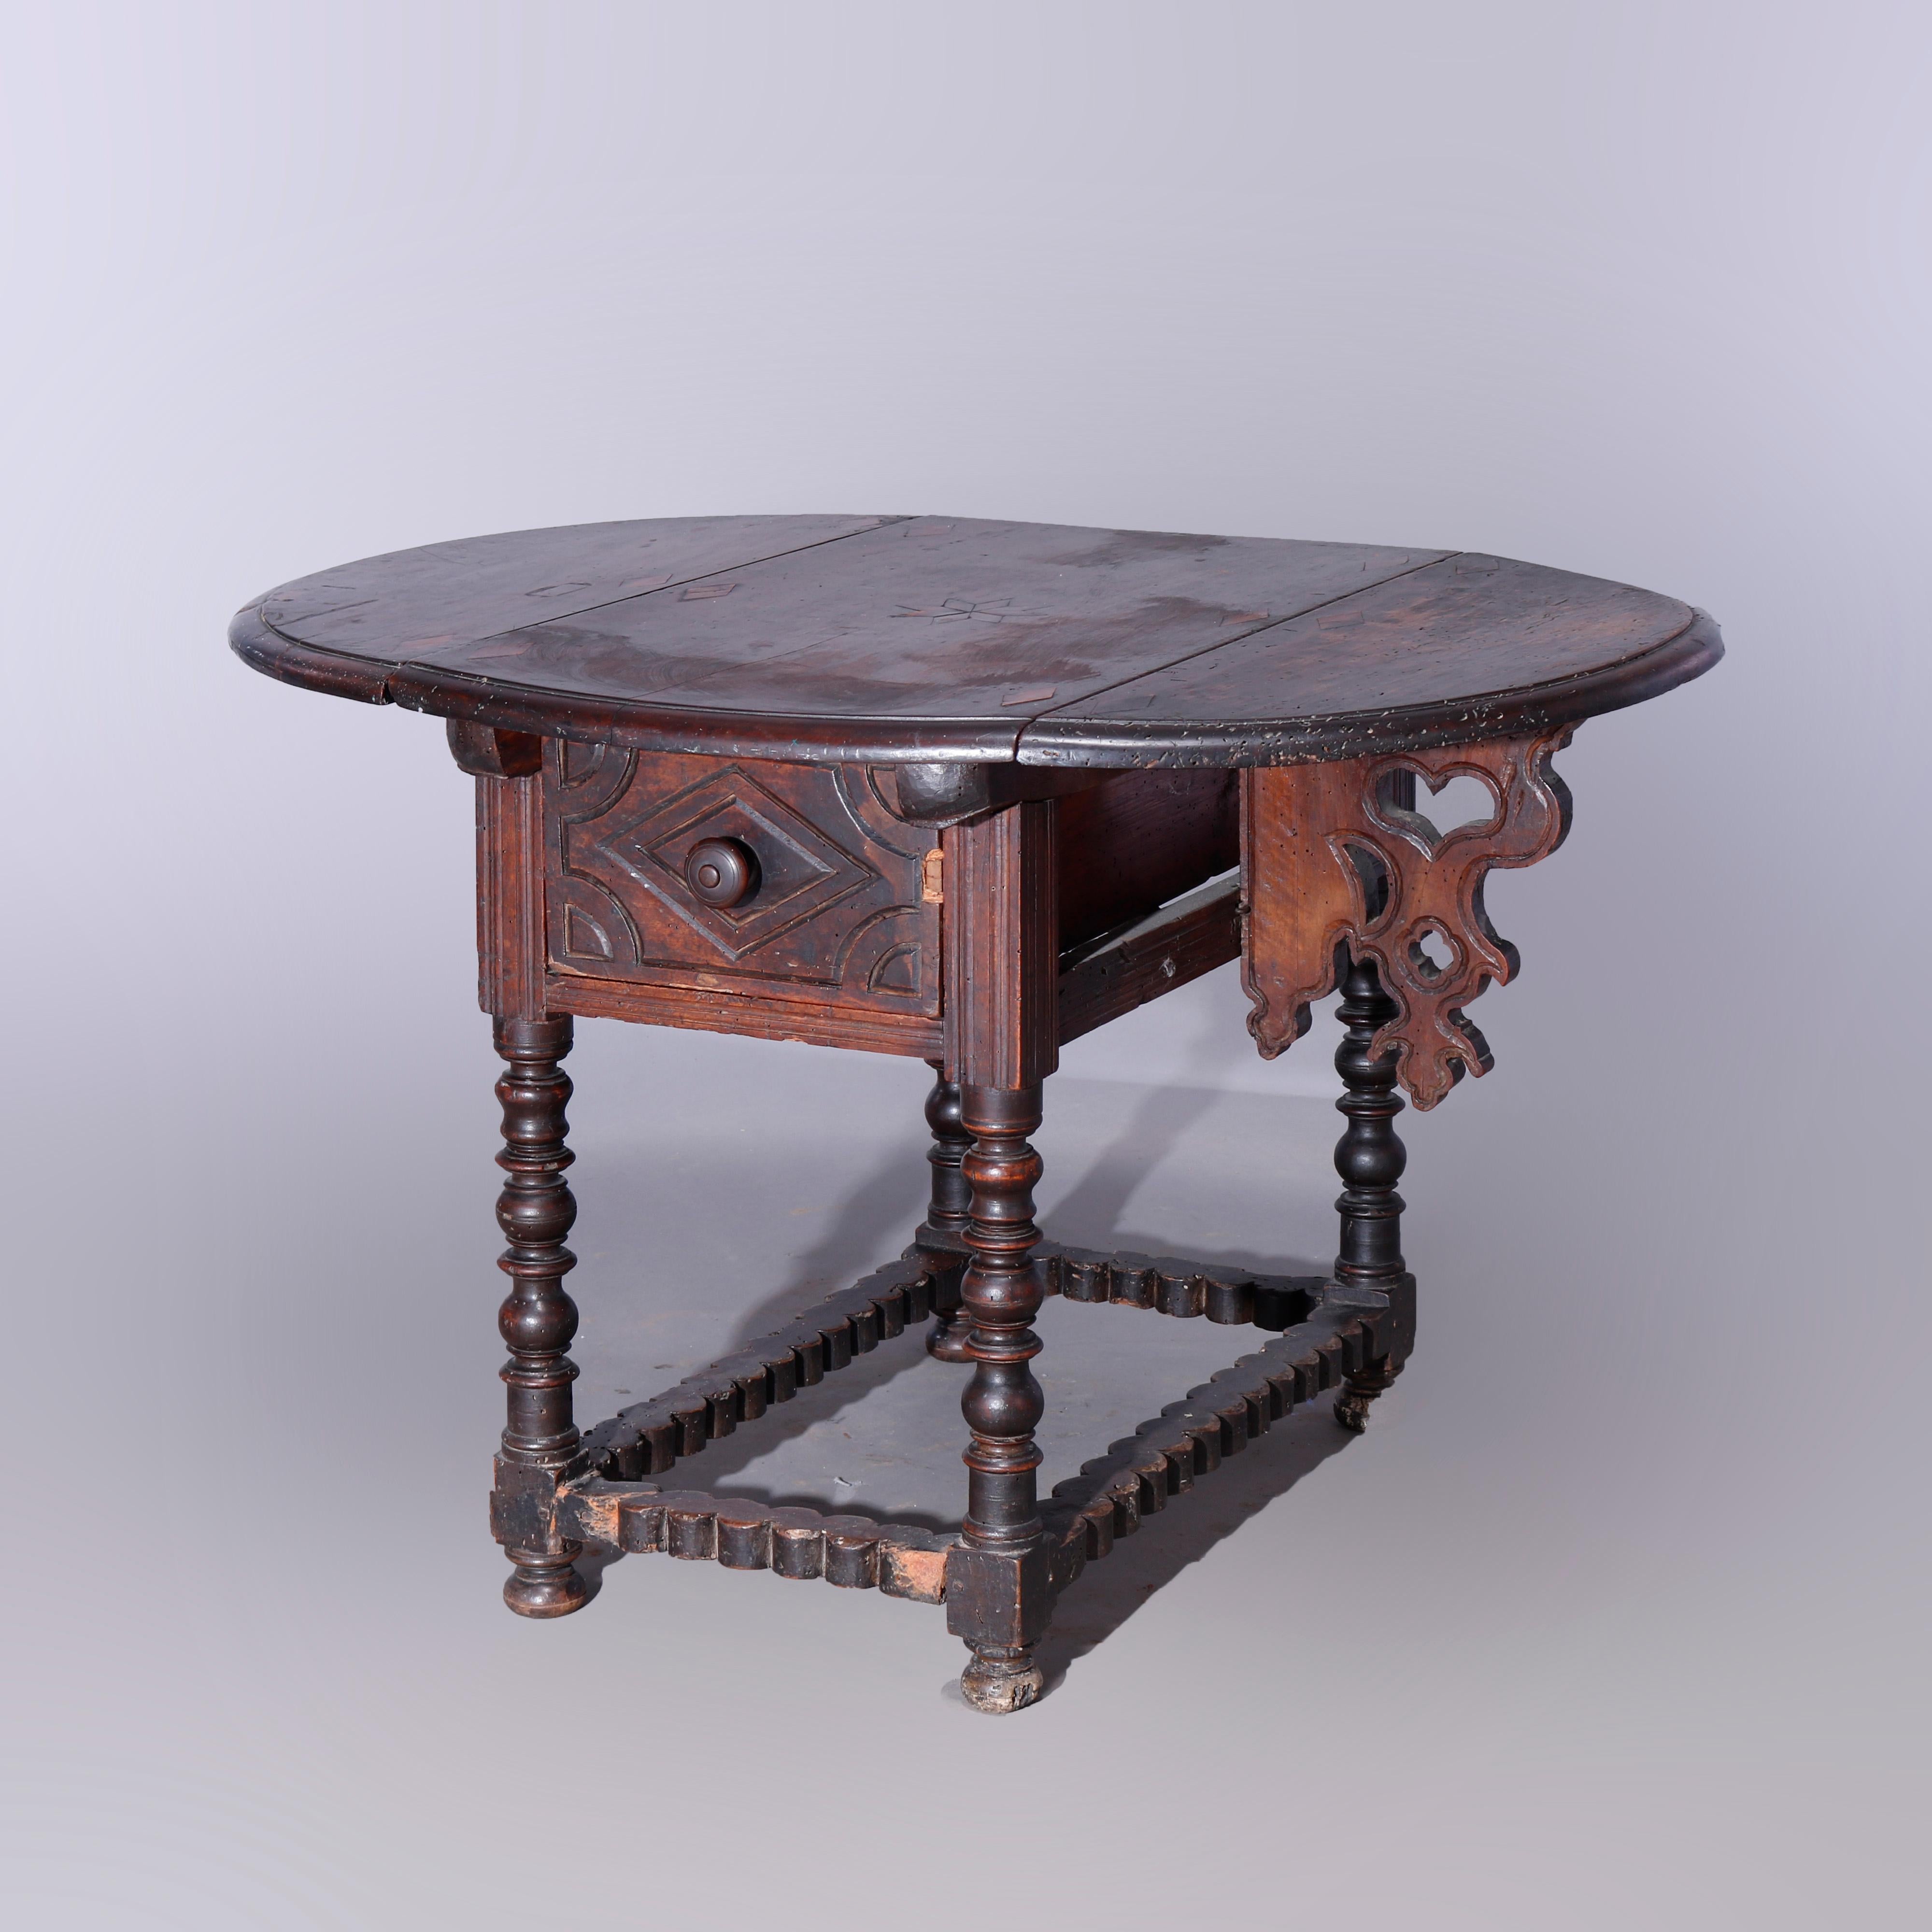 An antique Continental drop leaf table offers walnut construction with beveled drop leaf top having inlaid stylized floral and diamond design over single drawer, raised on turned balustrade legs with shaped and scroll form leaf supports, 17th